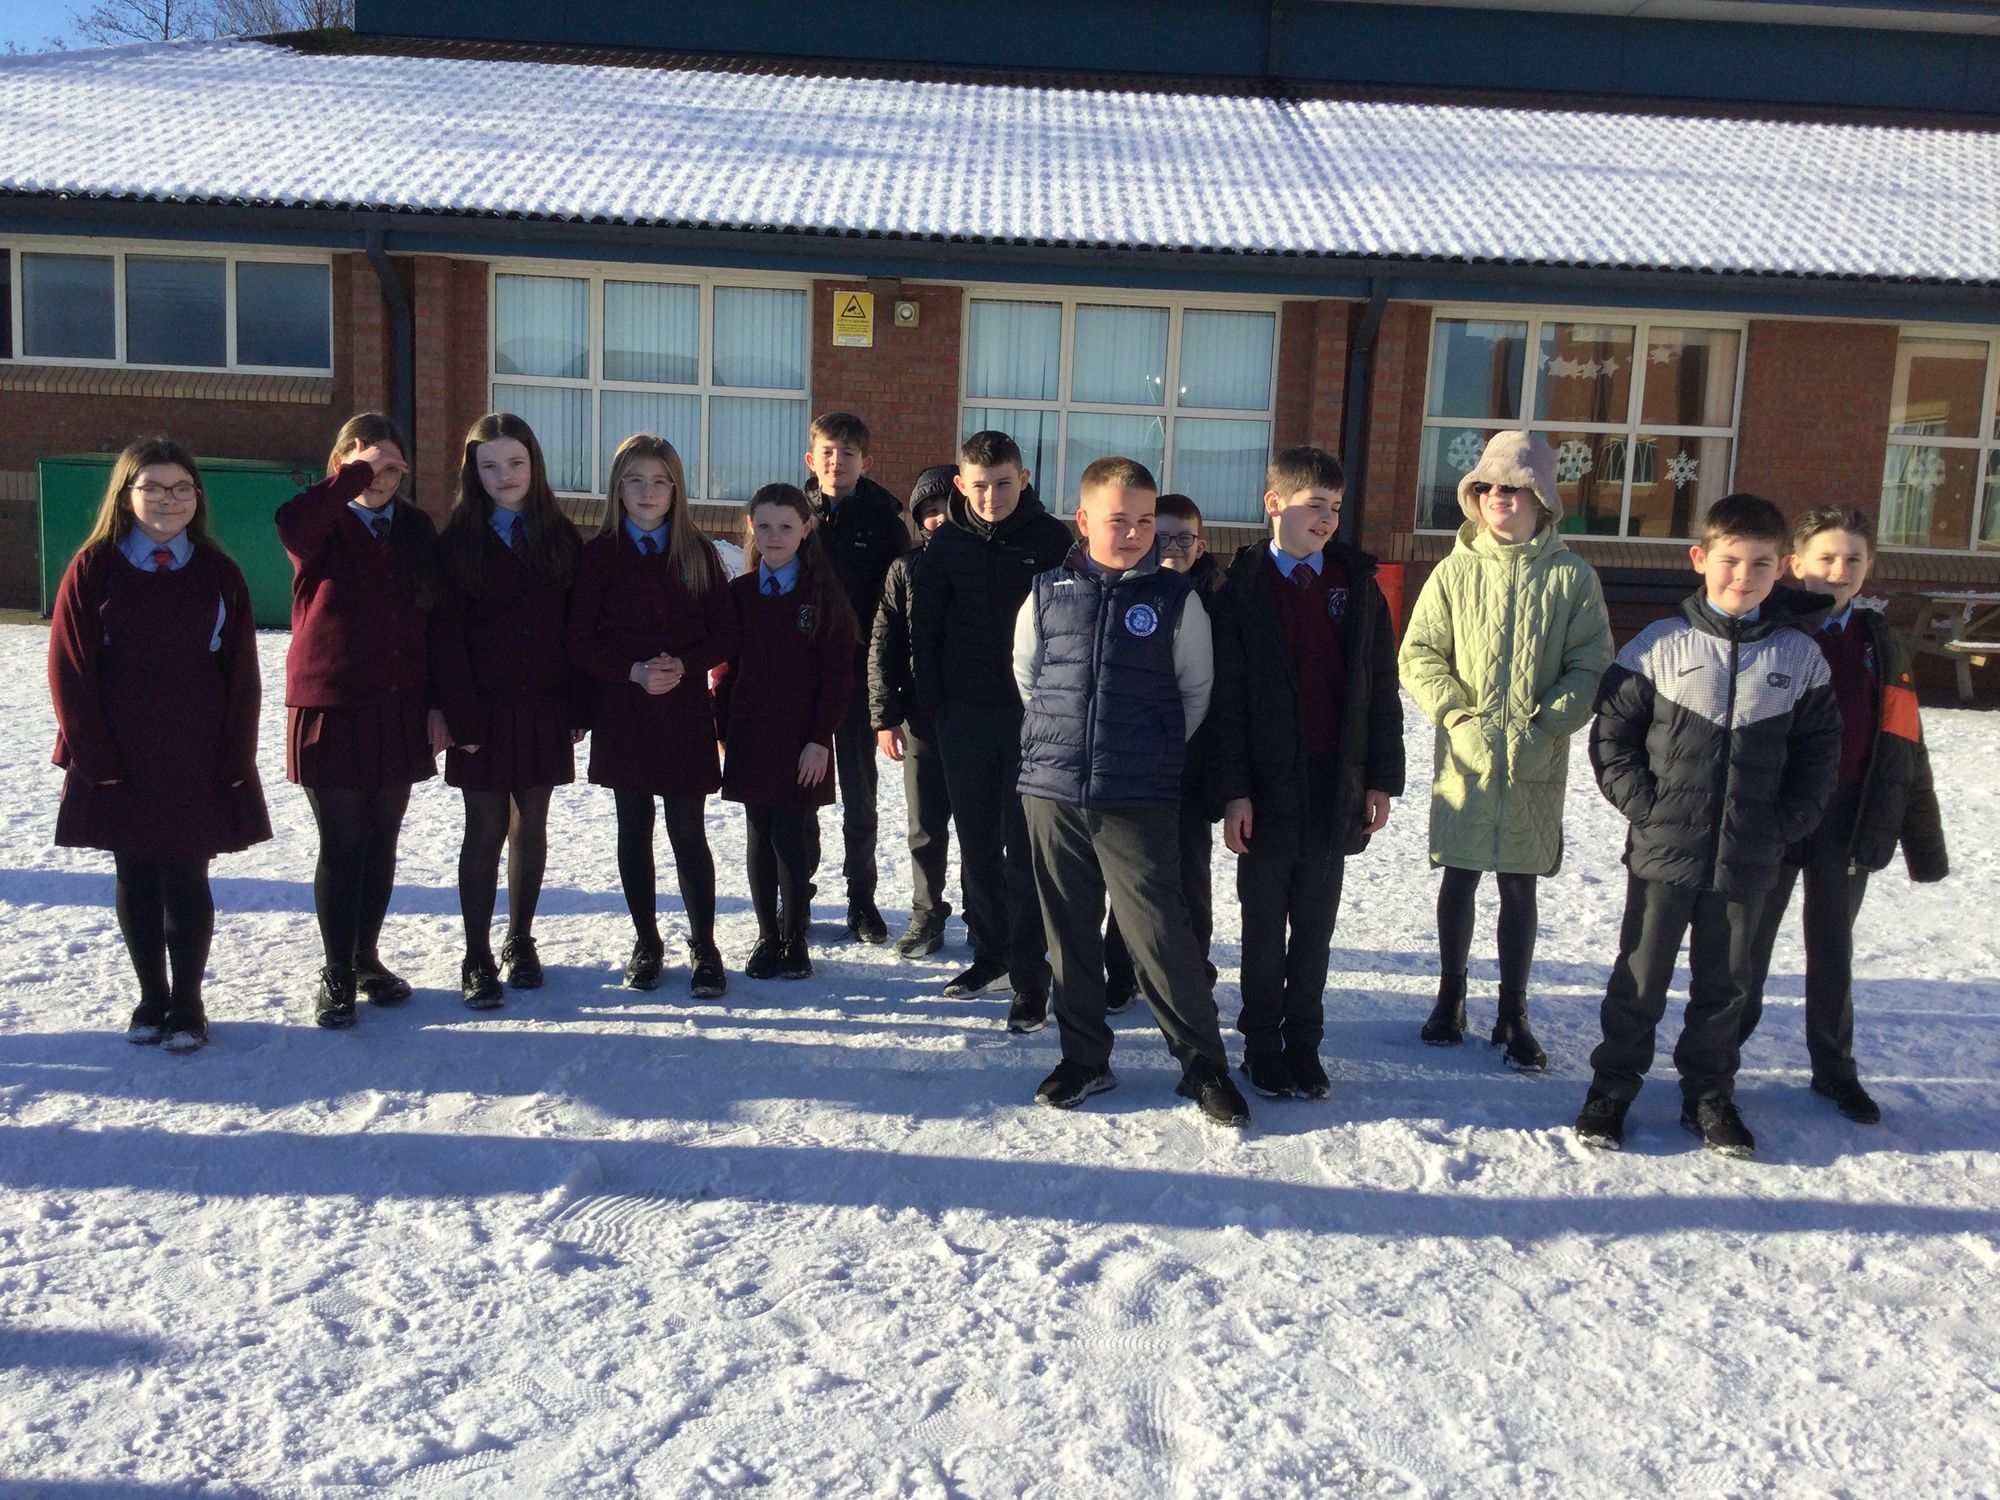 7C enjoying some fun in the snow earlier this week